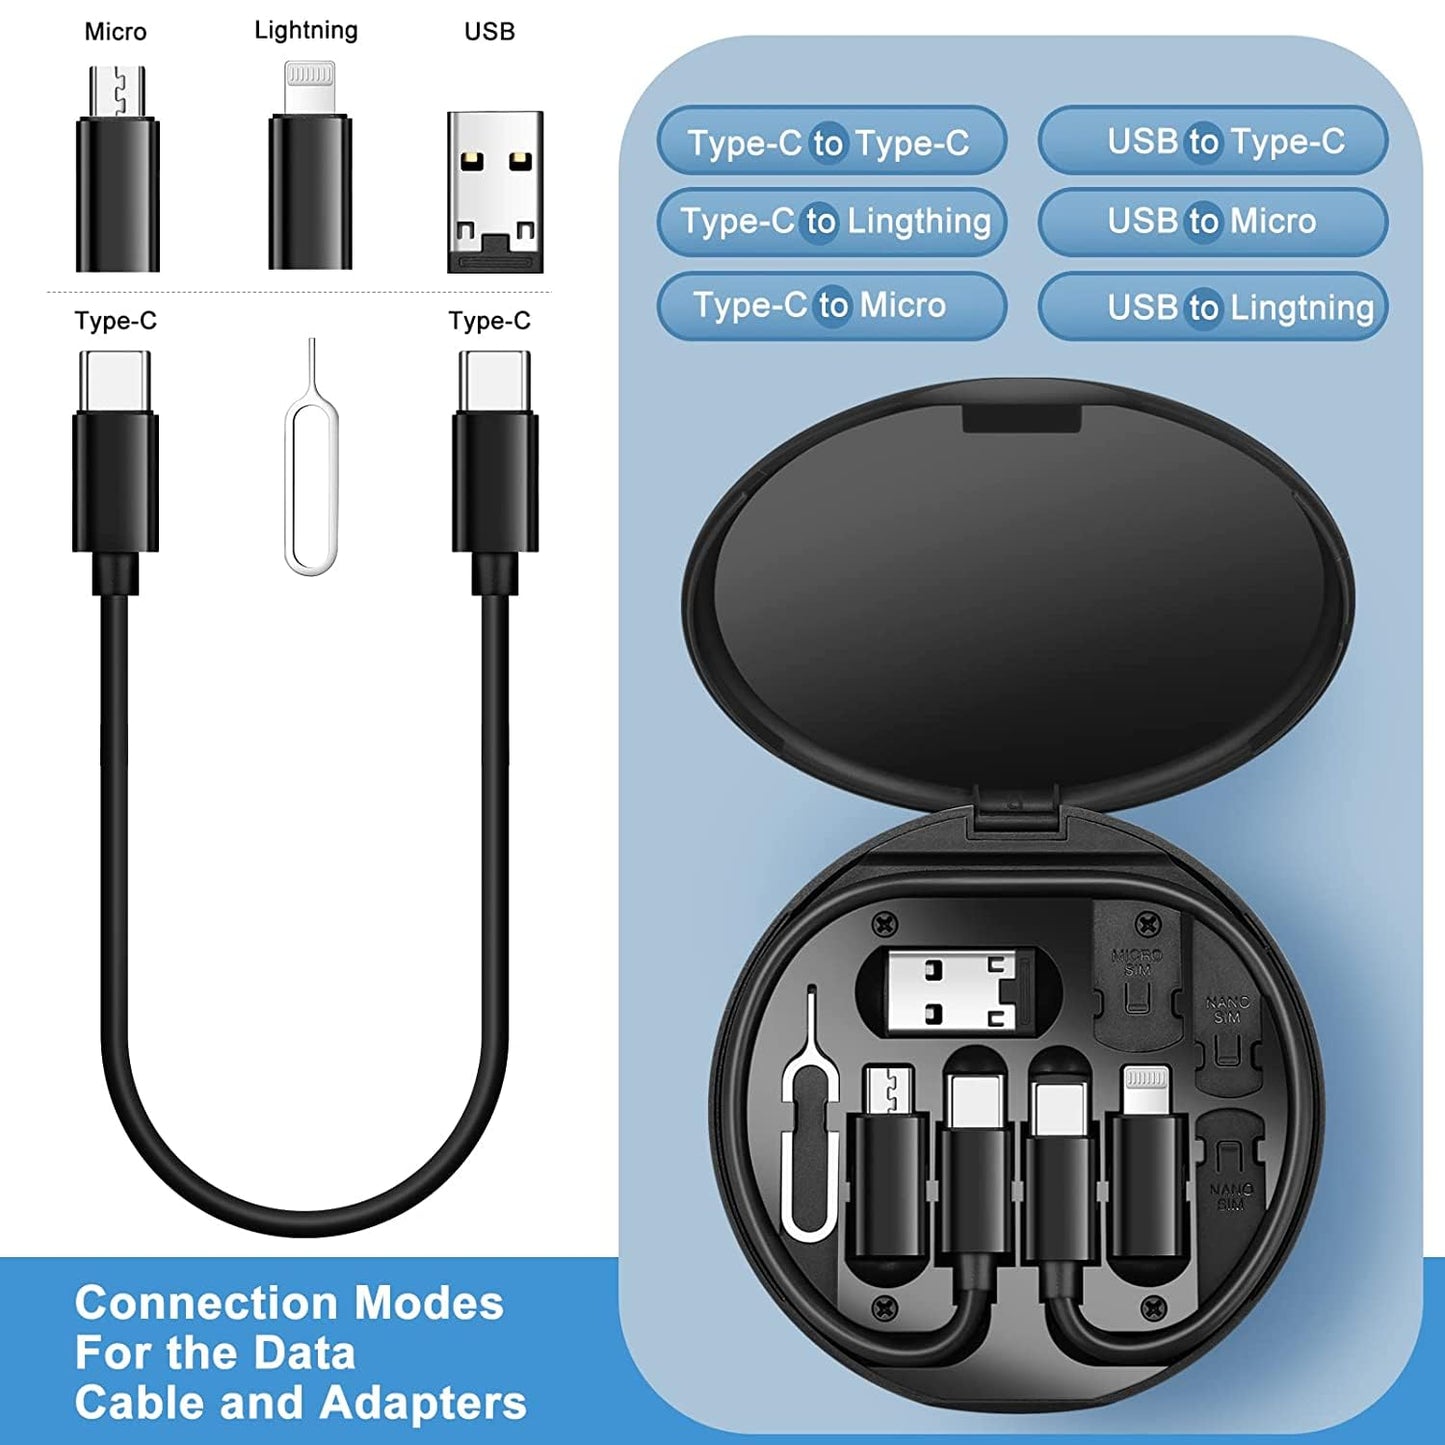 0377 Mini Multi-Functional Fast Charging Data Cable Set for Apple, Android, Type C Charging with Retrieve Card Pin,Round Storage Box,Compact and Portable, USB Data Cable Storage Box Travel Cable Set (5in1)